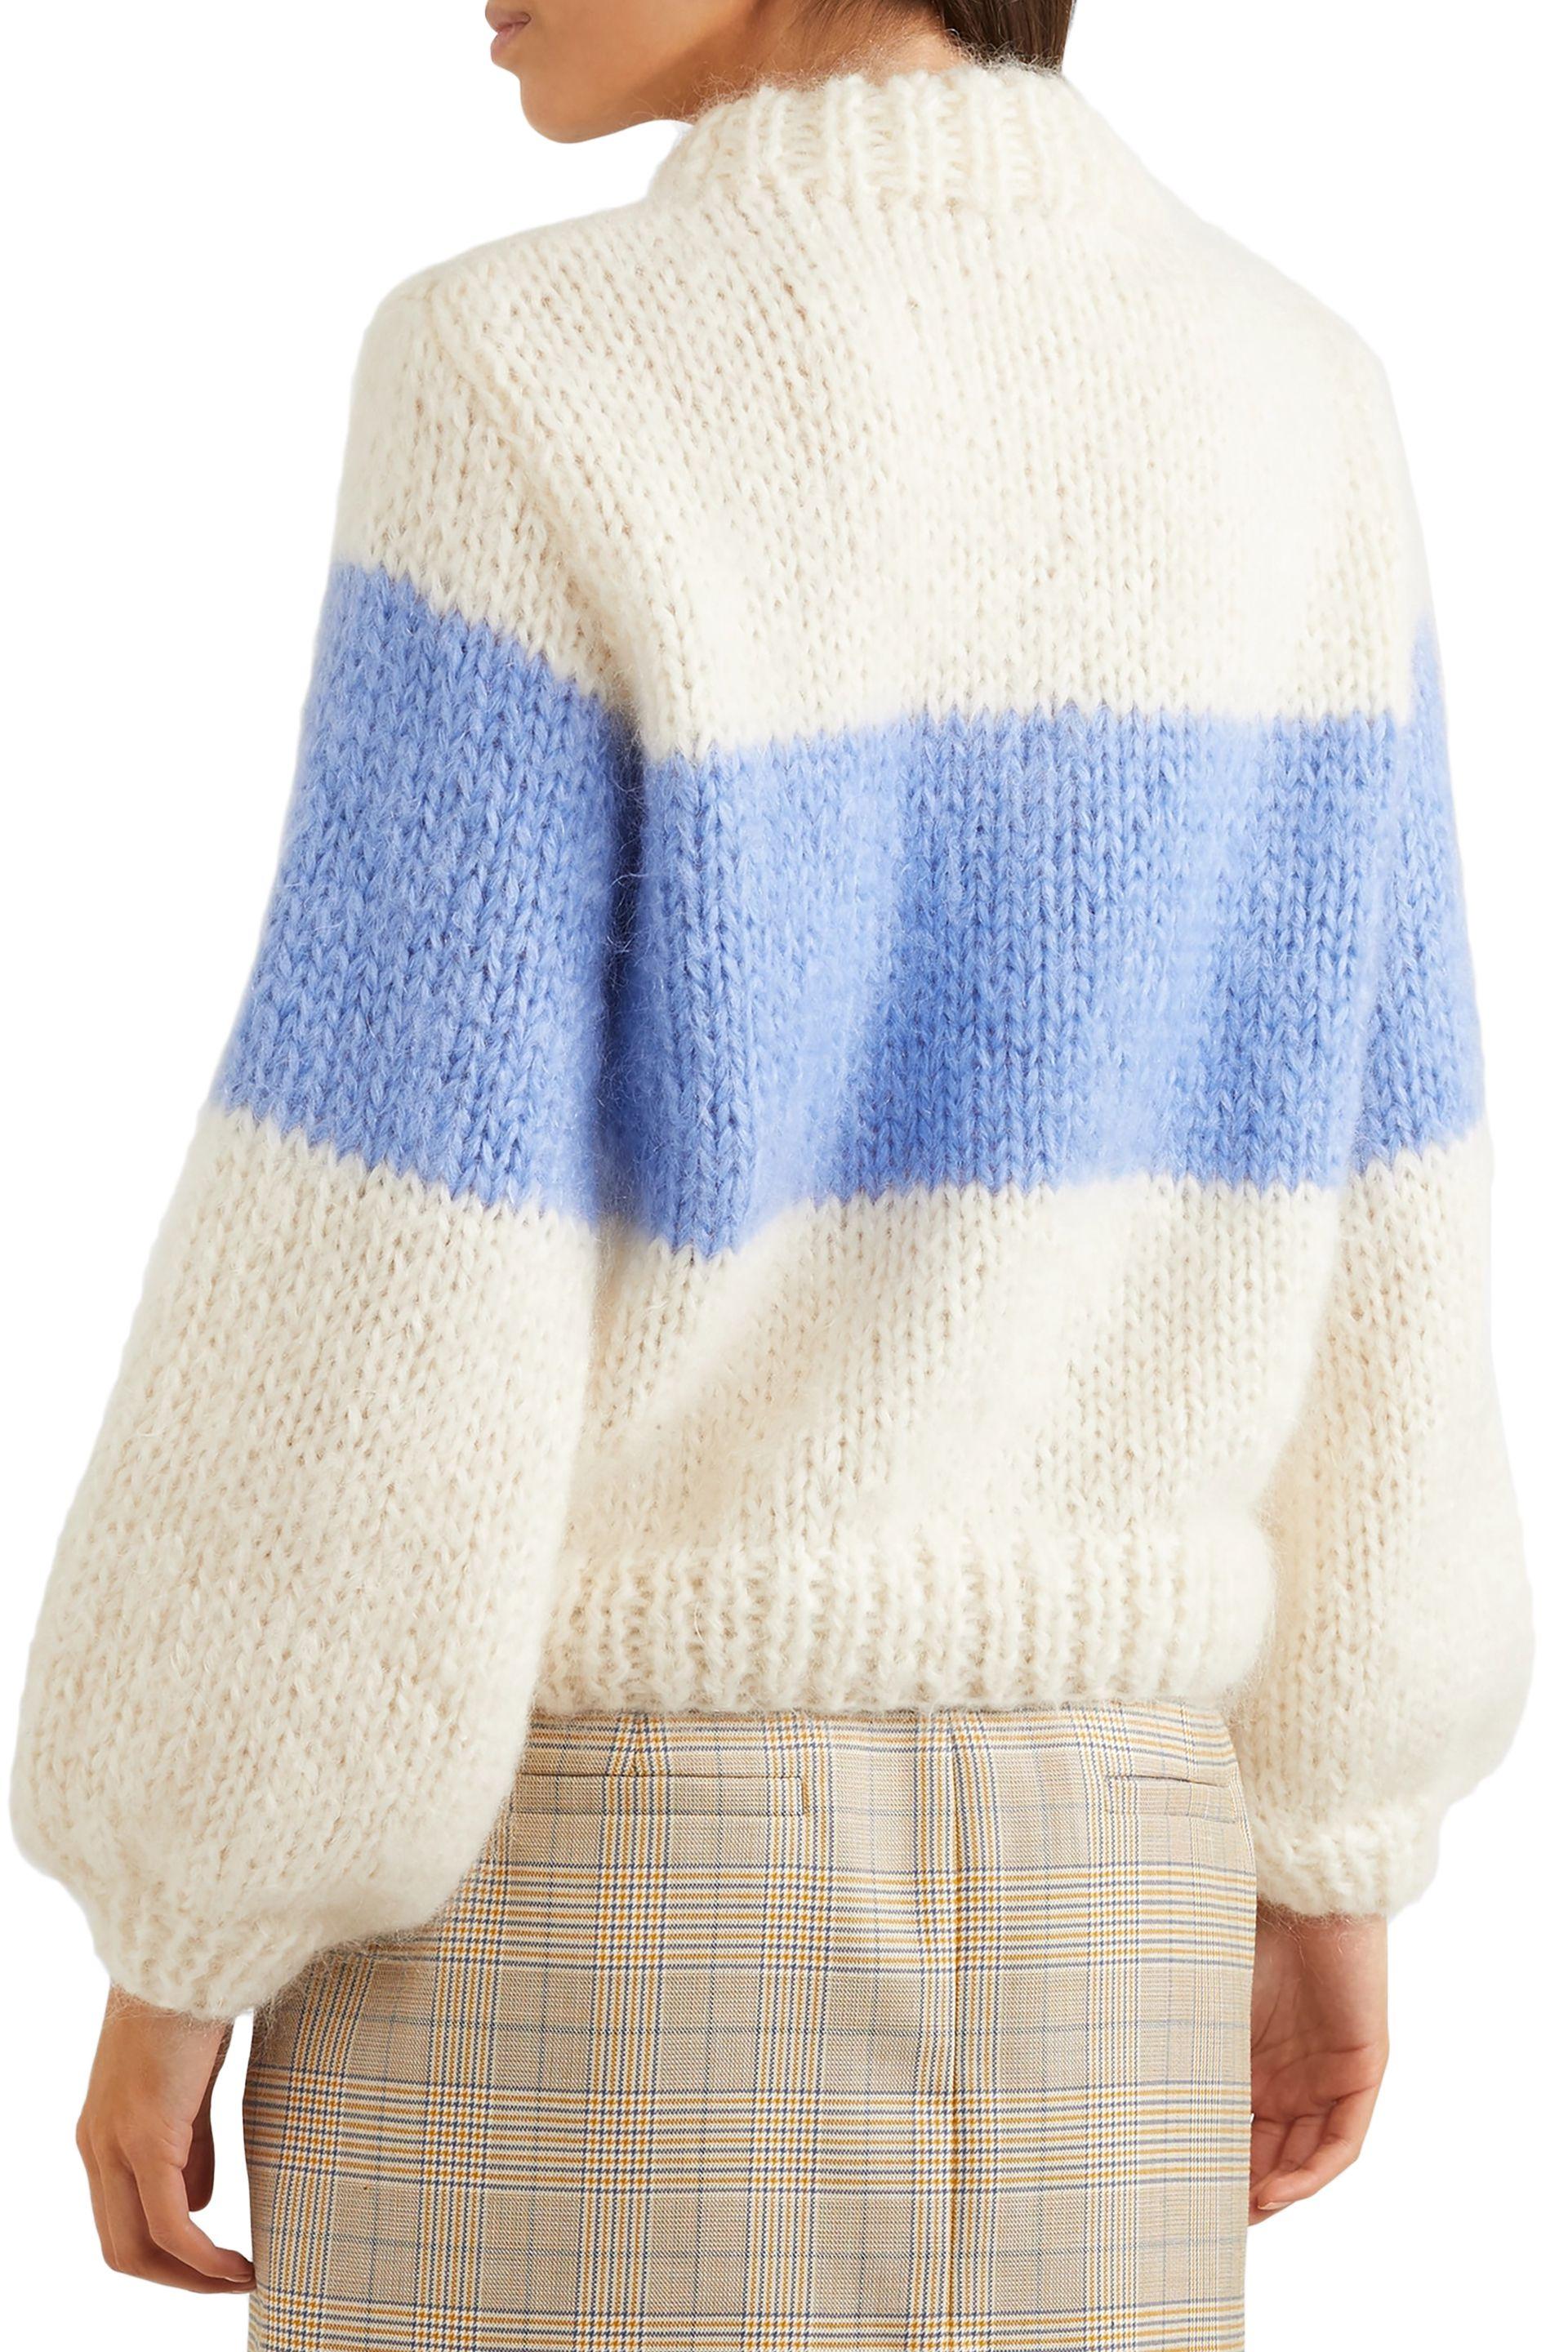 Ganni Striped Mohair And Wool-blend Sweater in Blue | Lyst